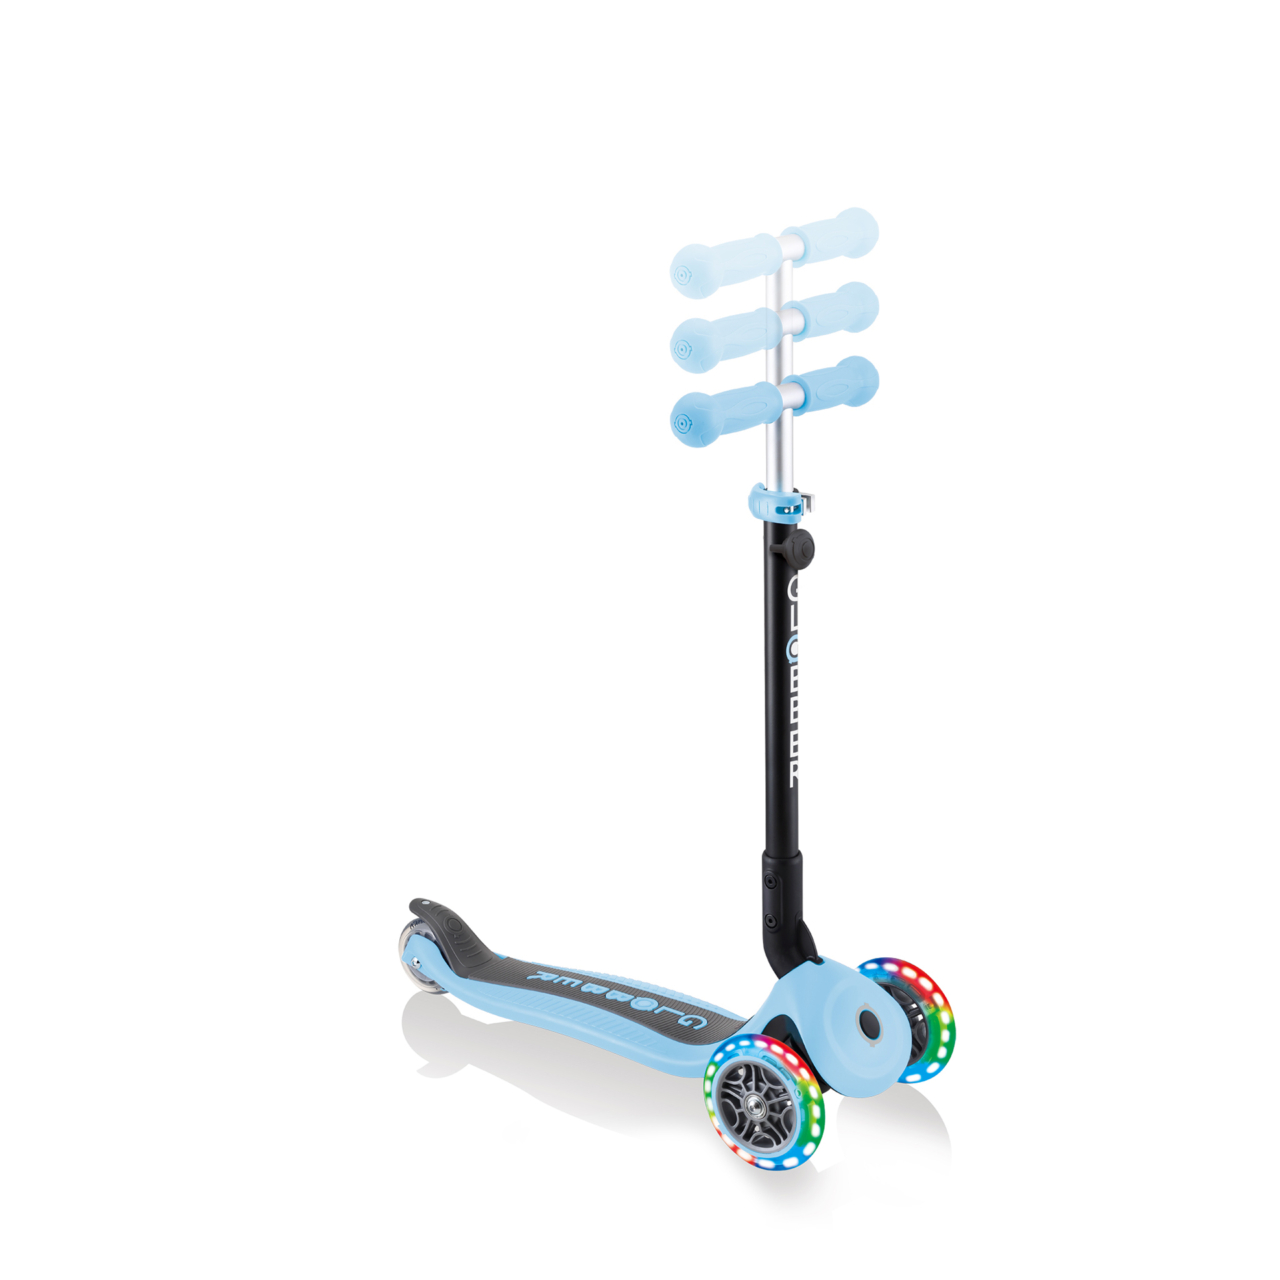 Blue Scooter With Adjustable T Bar.jpg